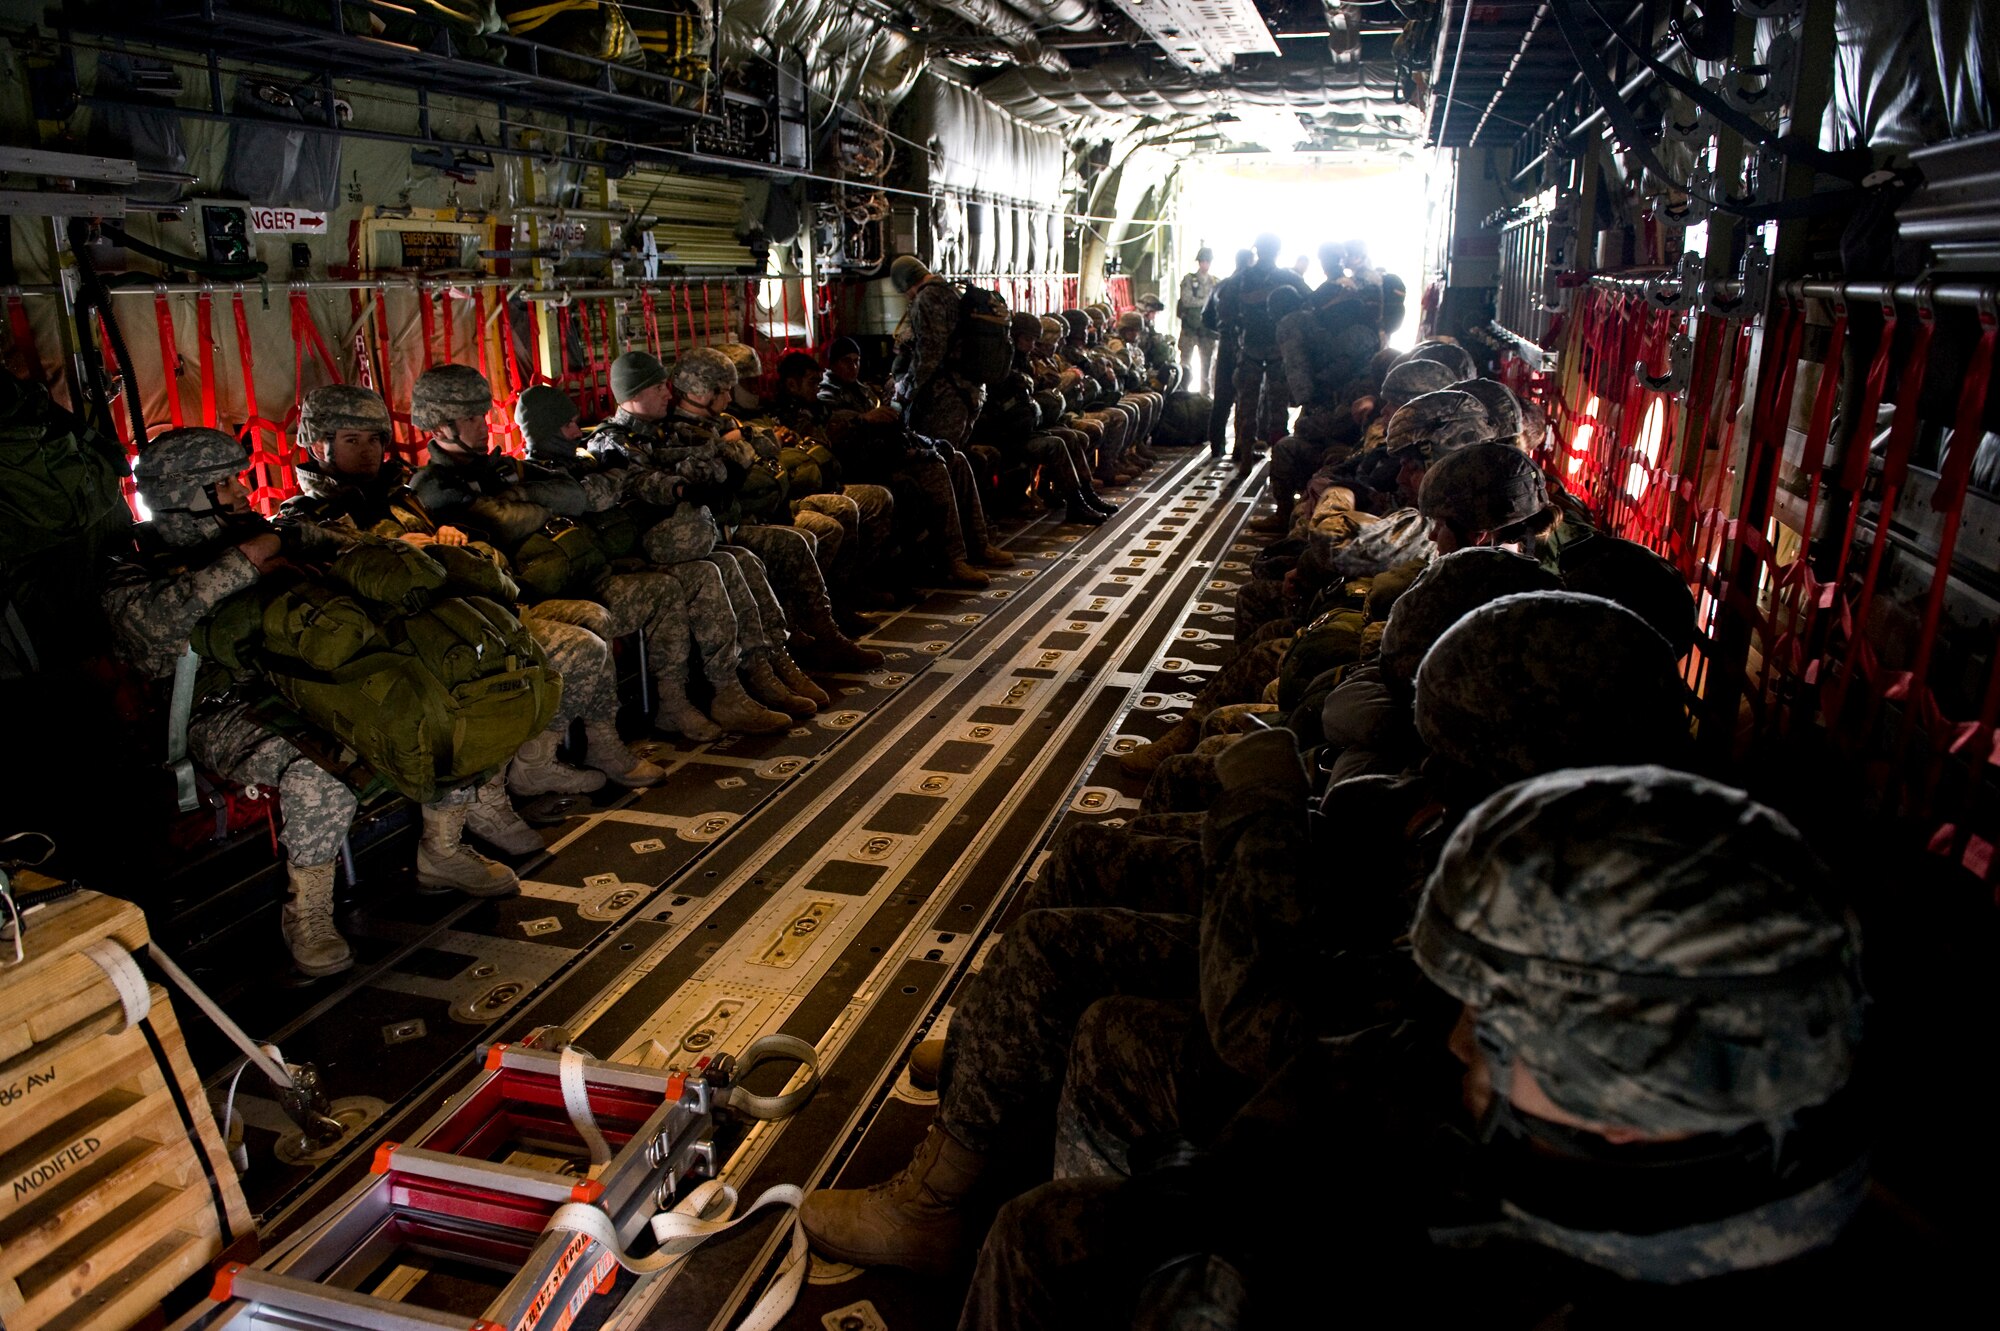 U.S. Army Soldiers, Air Force Airmen and German soldiers prepare for takeoff aboard a C-130J Hercules, from Ramstein Air Base, Germany, in preparation for a training airdrop over drop zone Marnheim, Germany, Feb. 10, 2011. The single C-130J aircraft from the 37th Airlift Squadron, 86th Airlift Wing dropped more than fifty service members at the drop site.  (U.S. Air Force photo/TSgt Wayne Clark, AFNE Regional News Bureau) (Released)